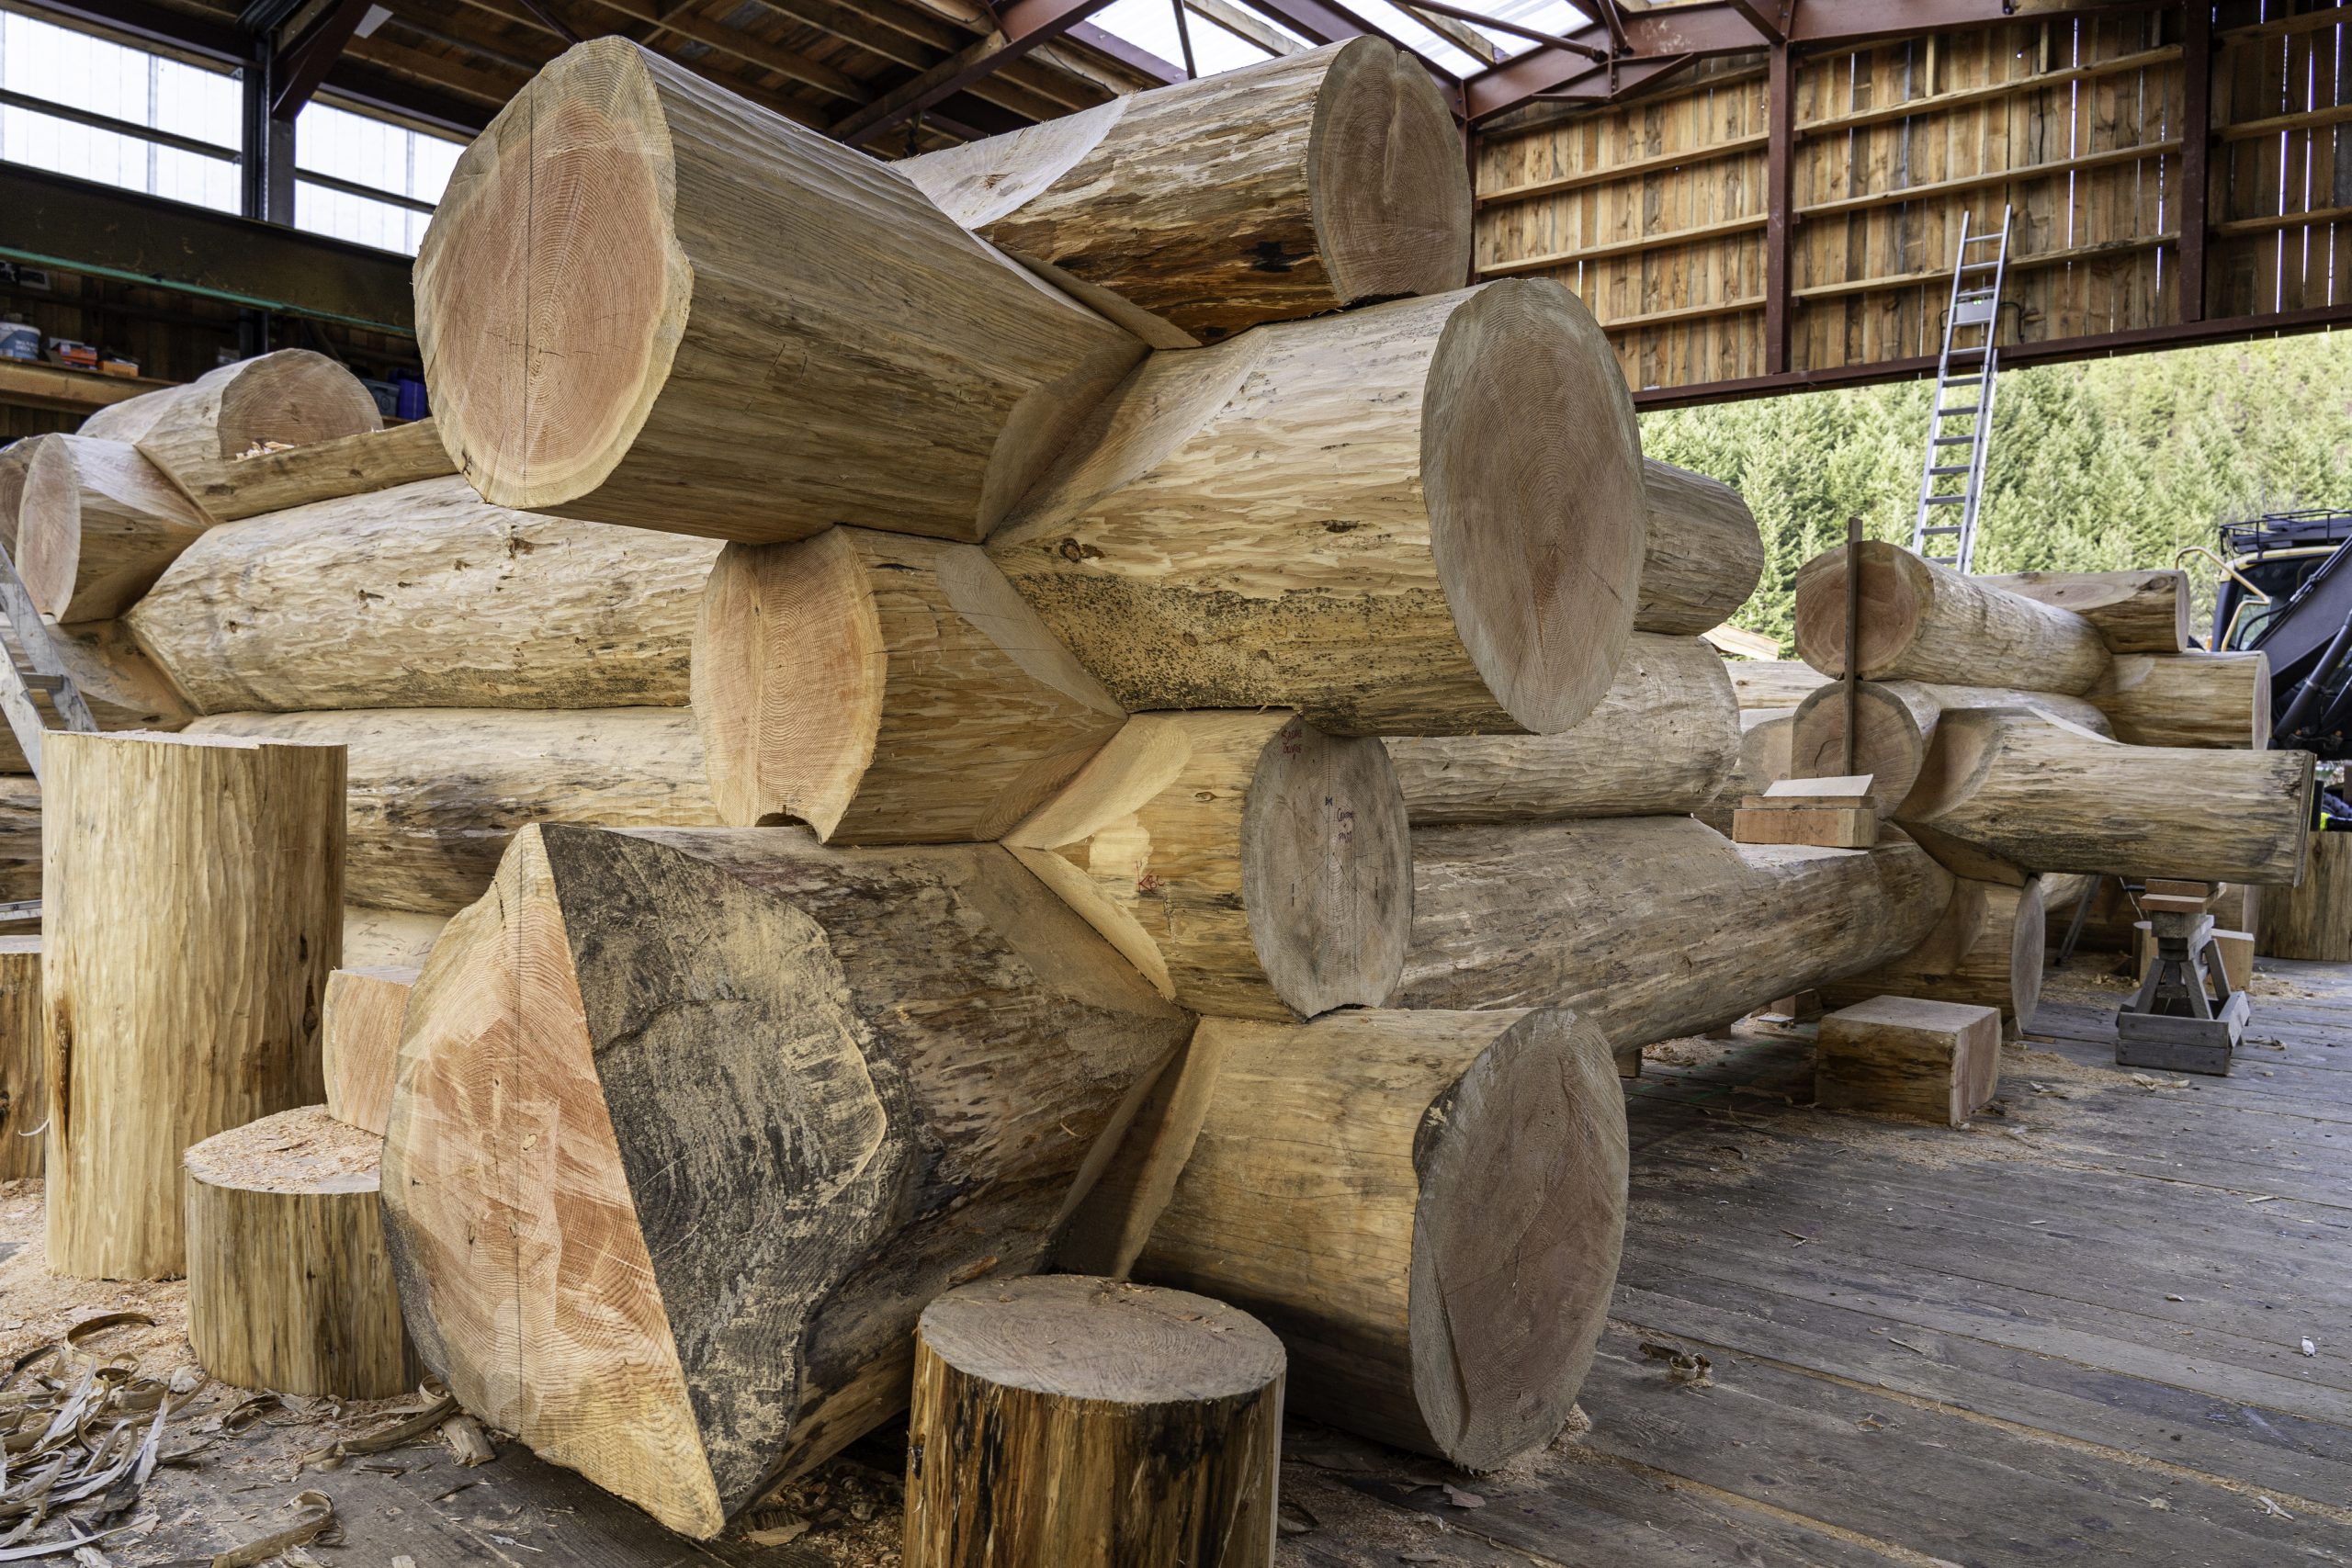 Bedrock Buildings, is preparing the logs at its workshop and is anticipating beginning work in the early summer to construct the building on a plot of land in the village of Tomich.